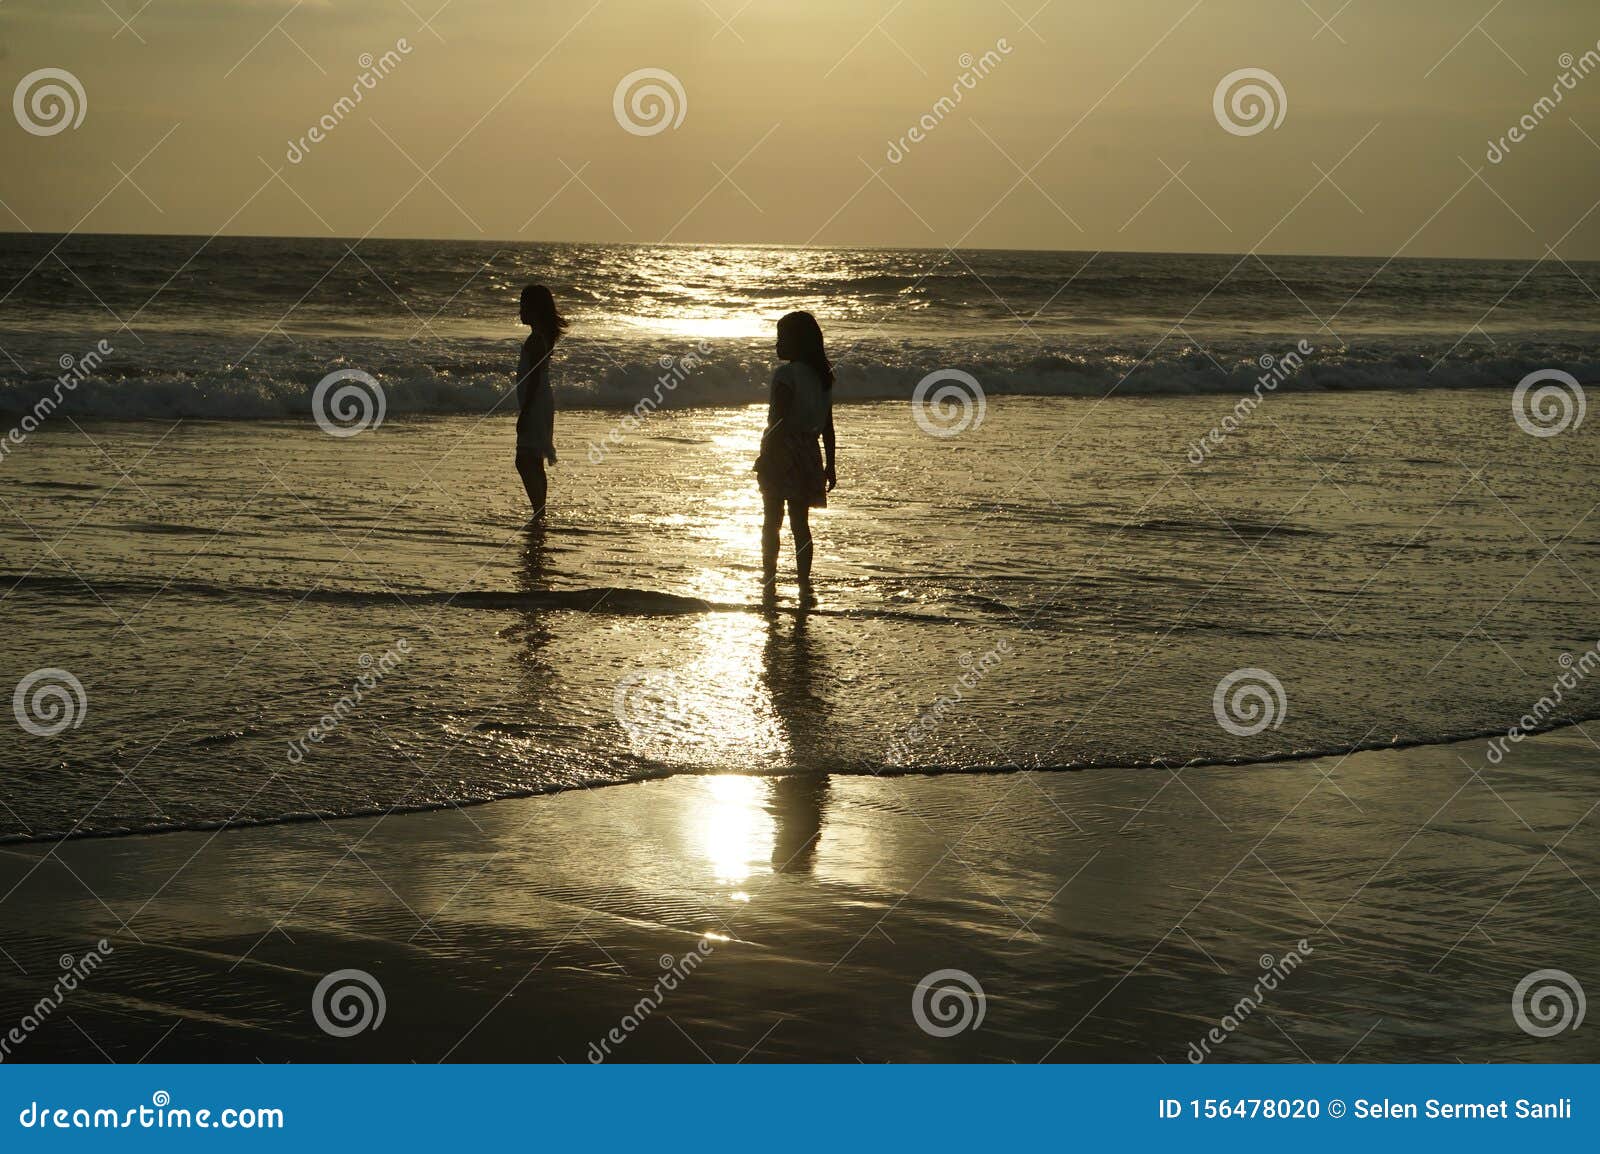 Silhouettes of Two Girls on the Beach at Sunset in Bali Editorial Image ...